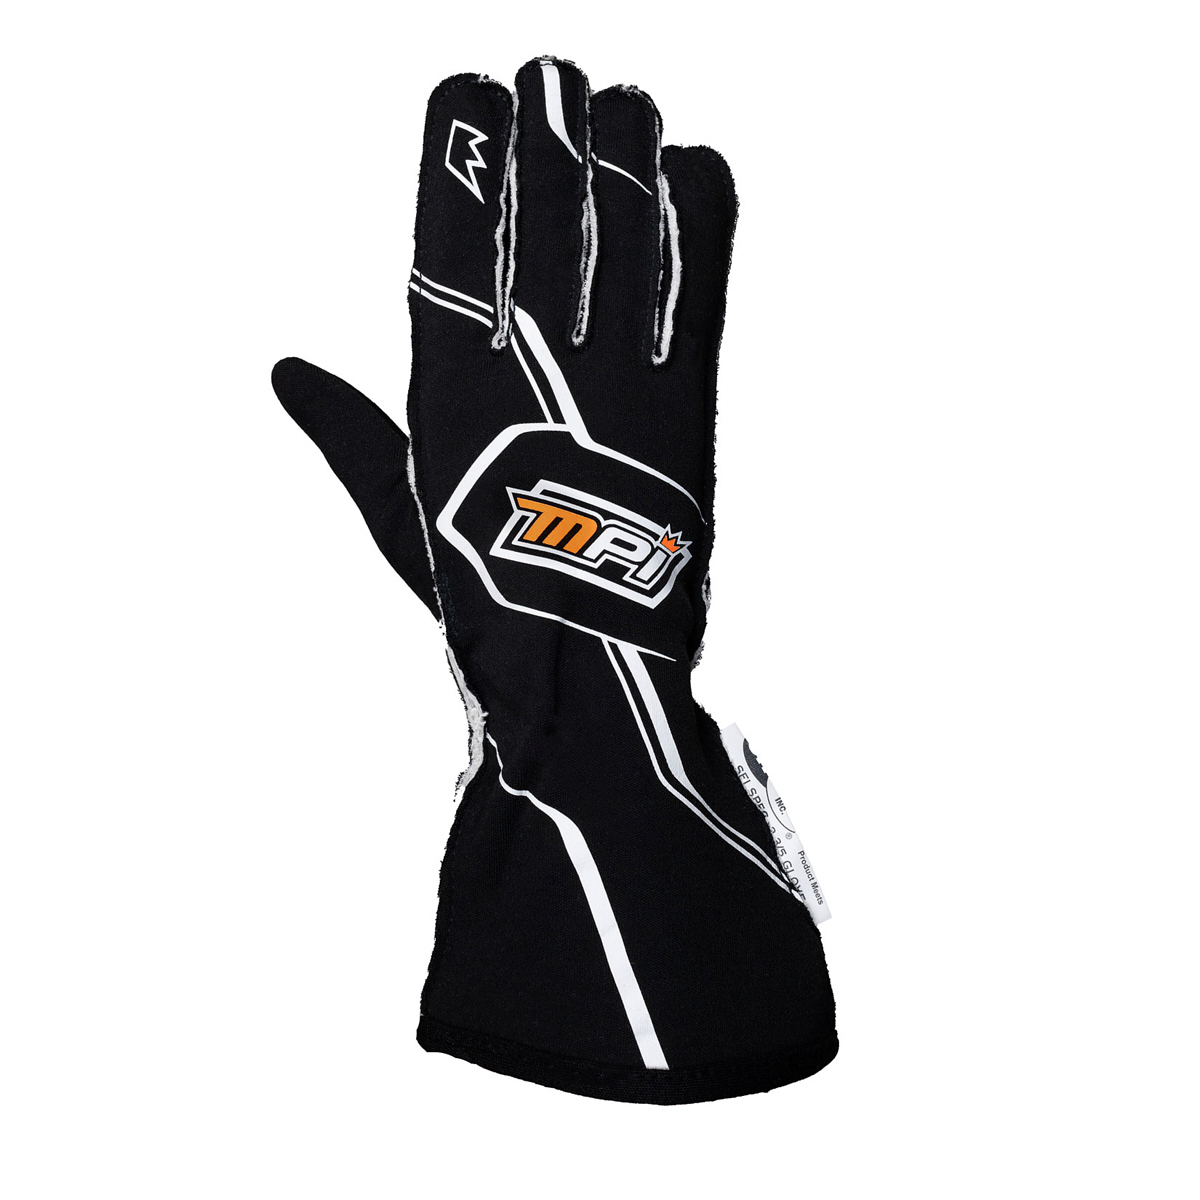 MPI USA MPI-GL-B-S - Gloves, Driving, SFI 3.3/5, Double Layer, Nomex, Padded Palm, Black / White, Small, Pair